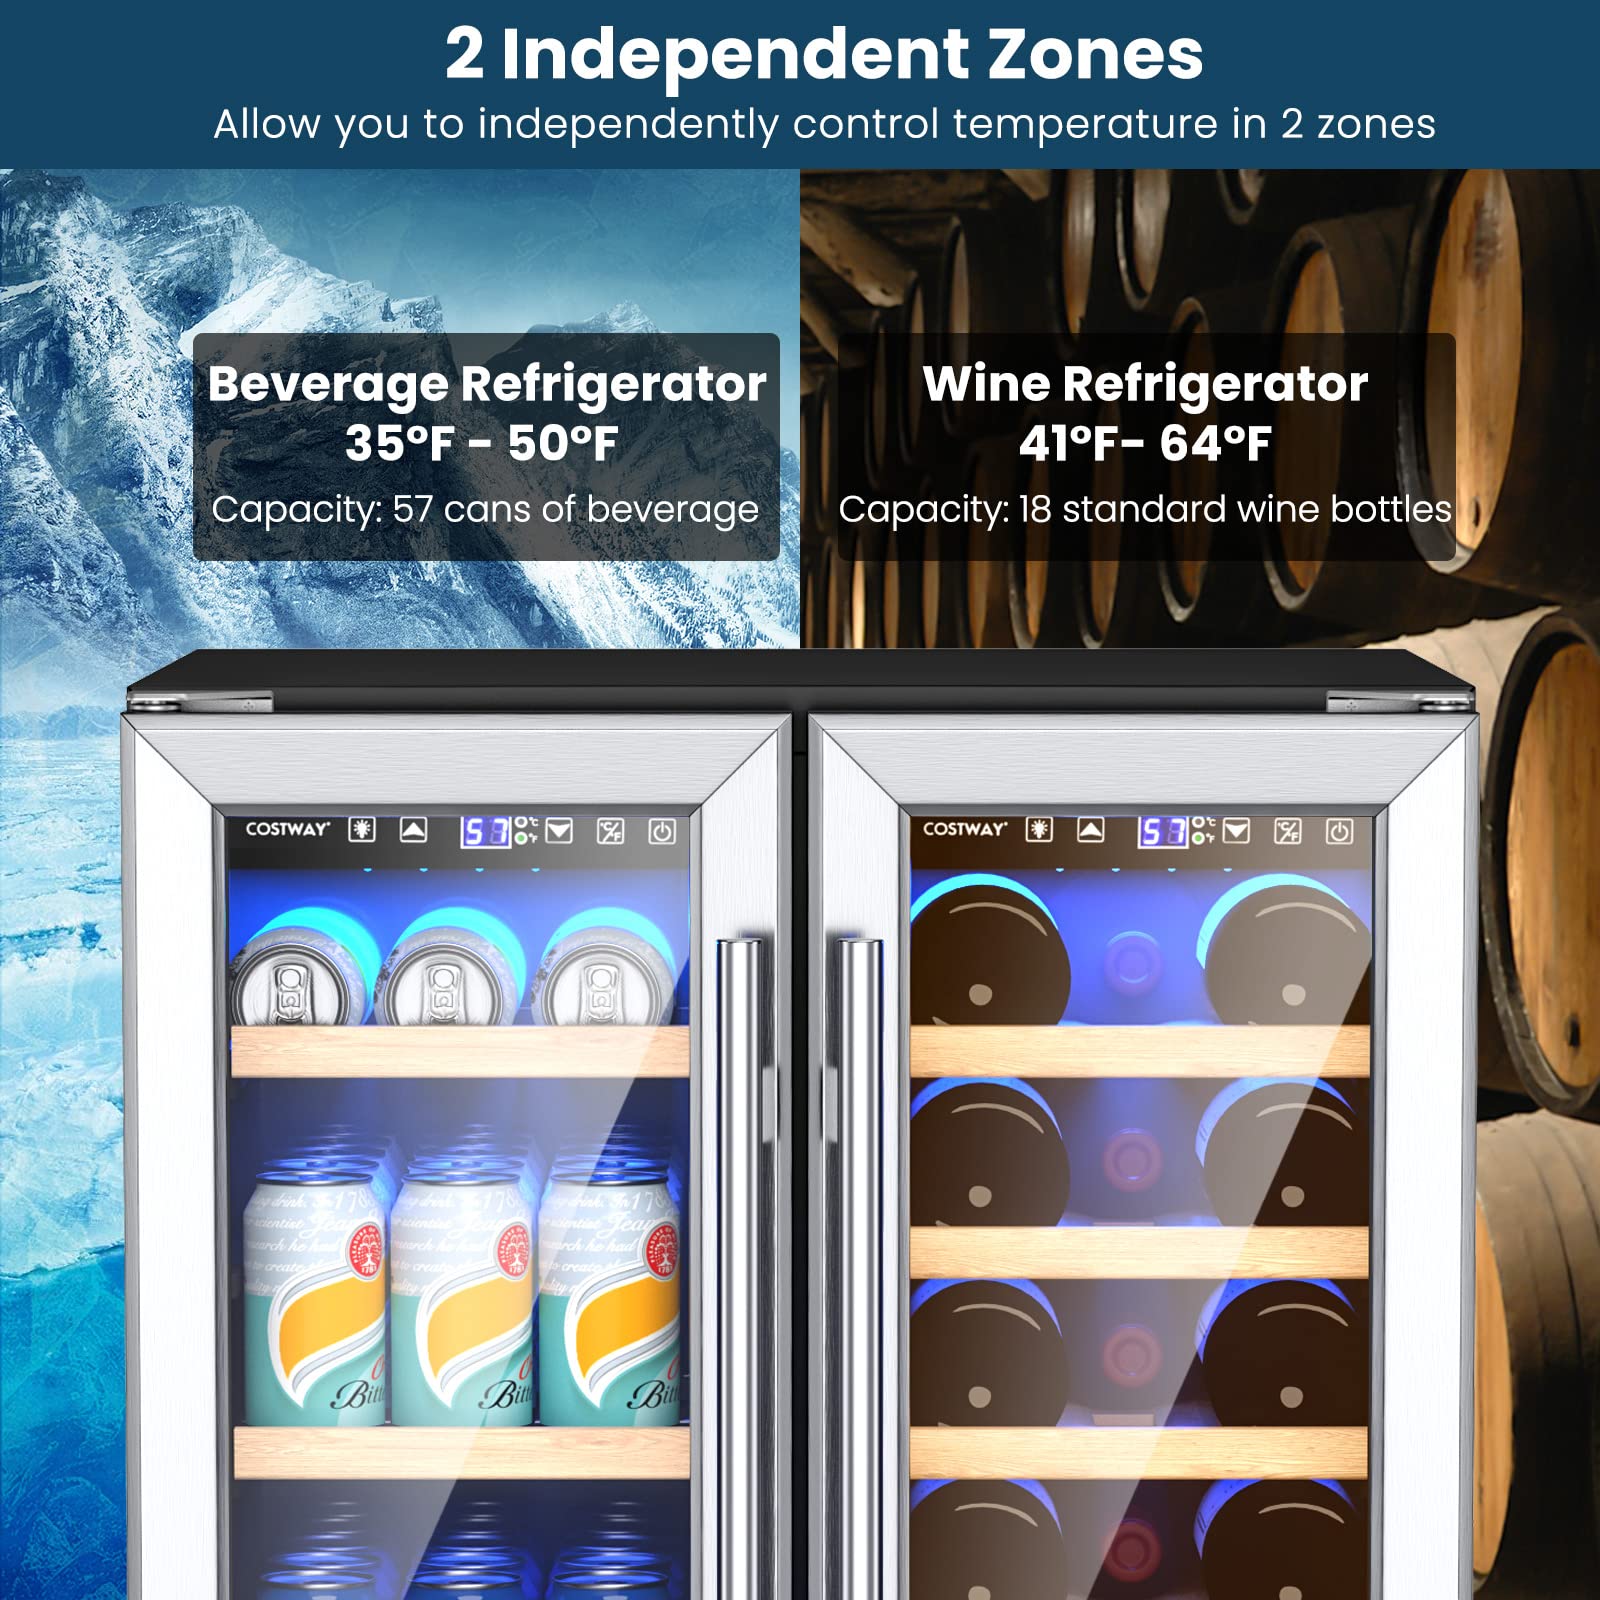 COSTWAY 24 Inch Wine and Beverage Refrigerator, Dual Zone 19 Bottles and 57 Cans Wine Cooler, Under Counter Wine Fridge with Lock, Built-In Freestanding Beverage Fridge for Beer Soda Drink